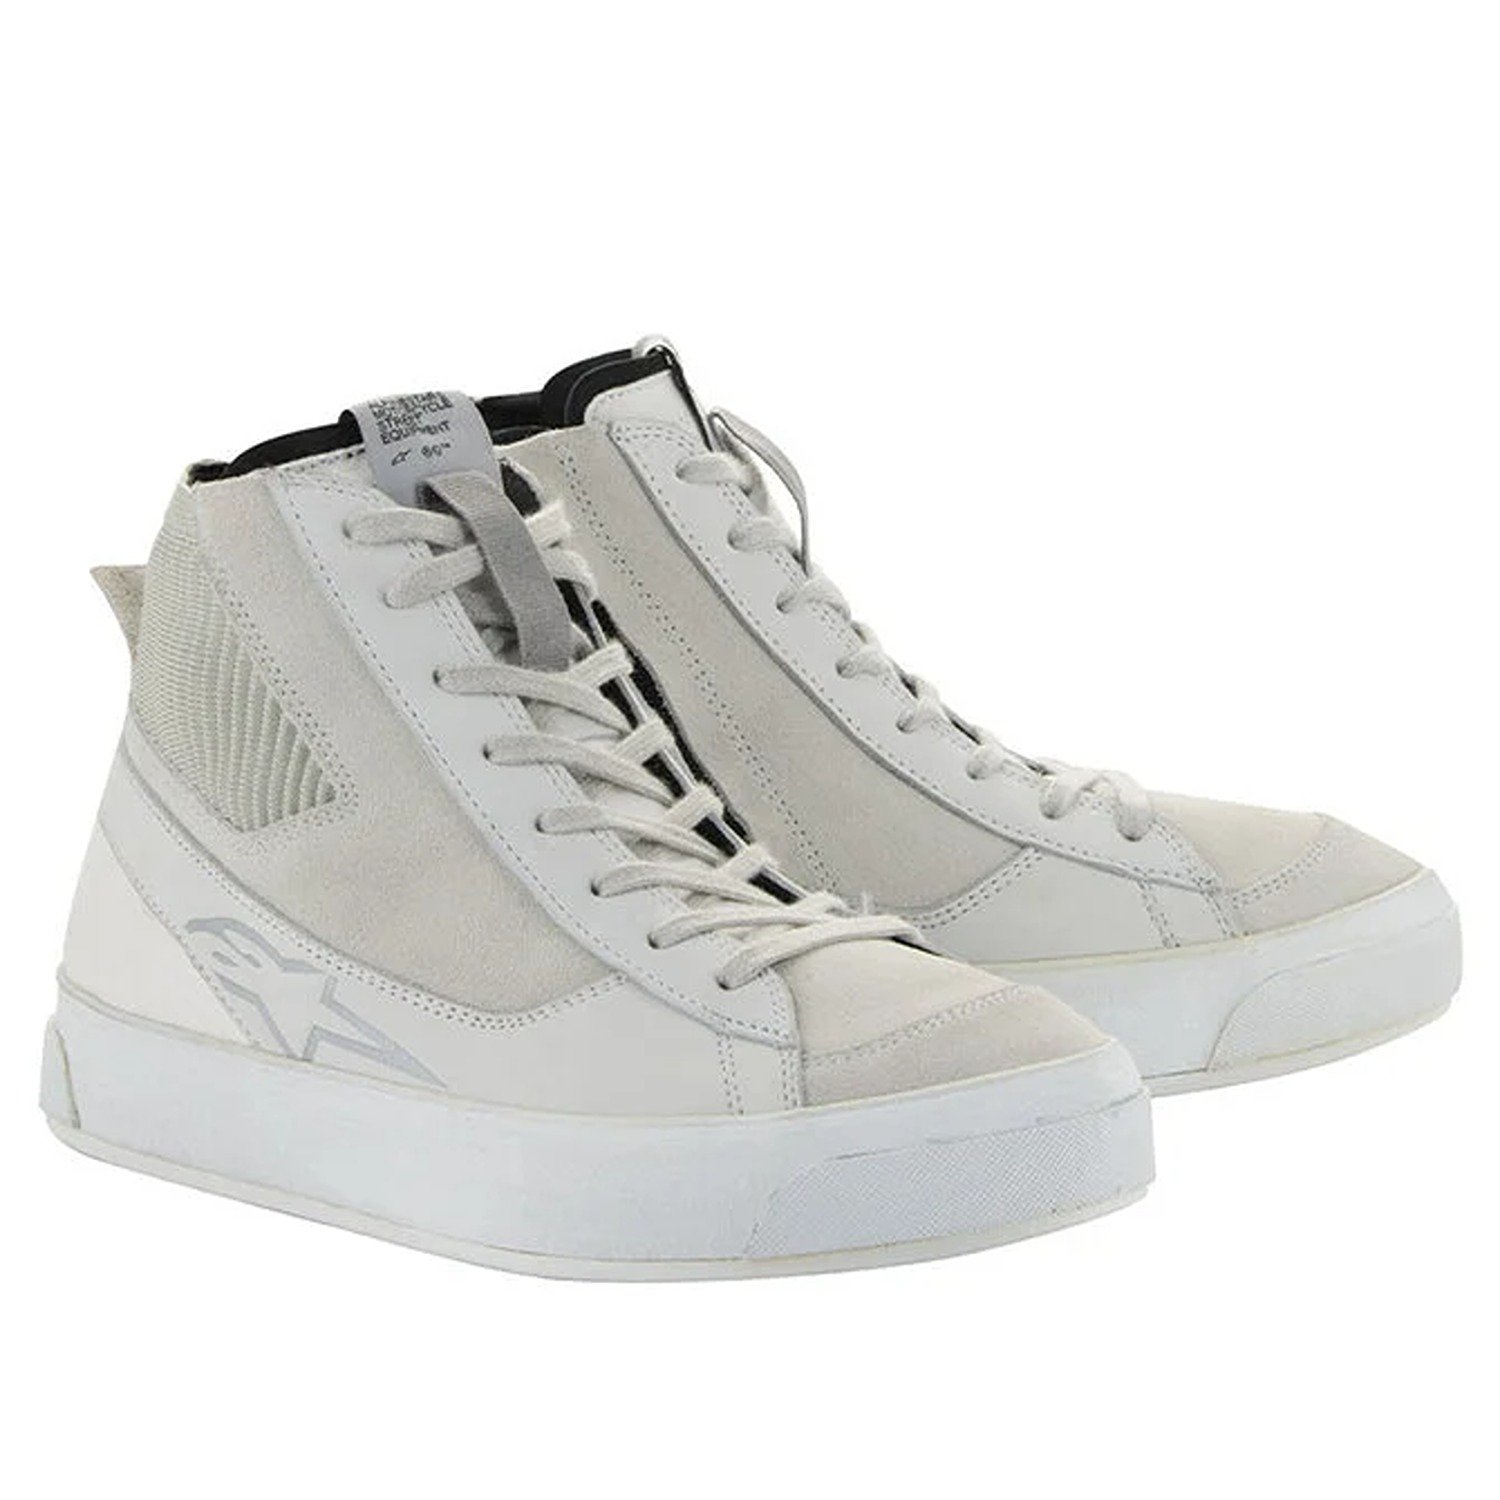 Image of Alpinestars Stated Shoes White Cool Gray Talla US 95